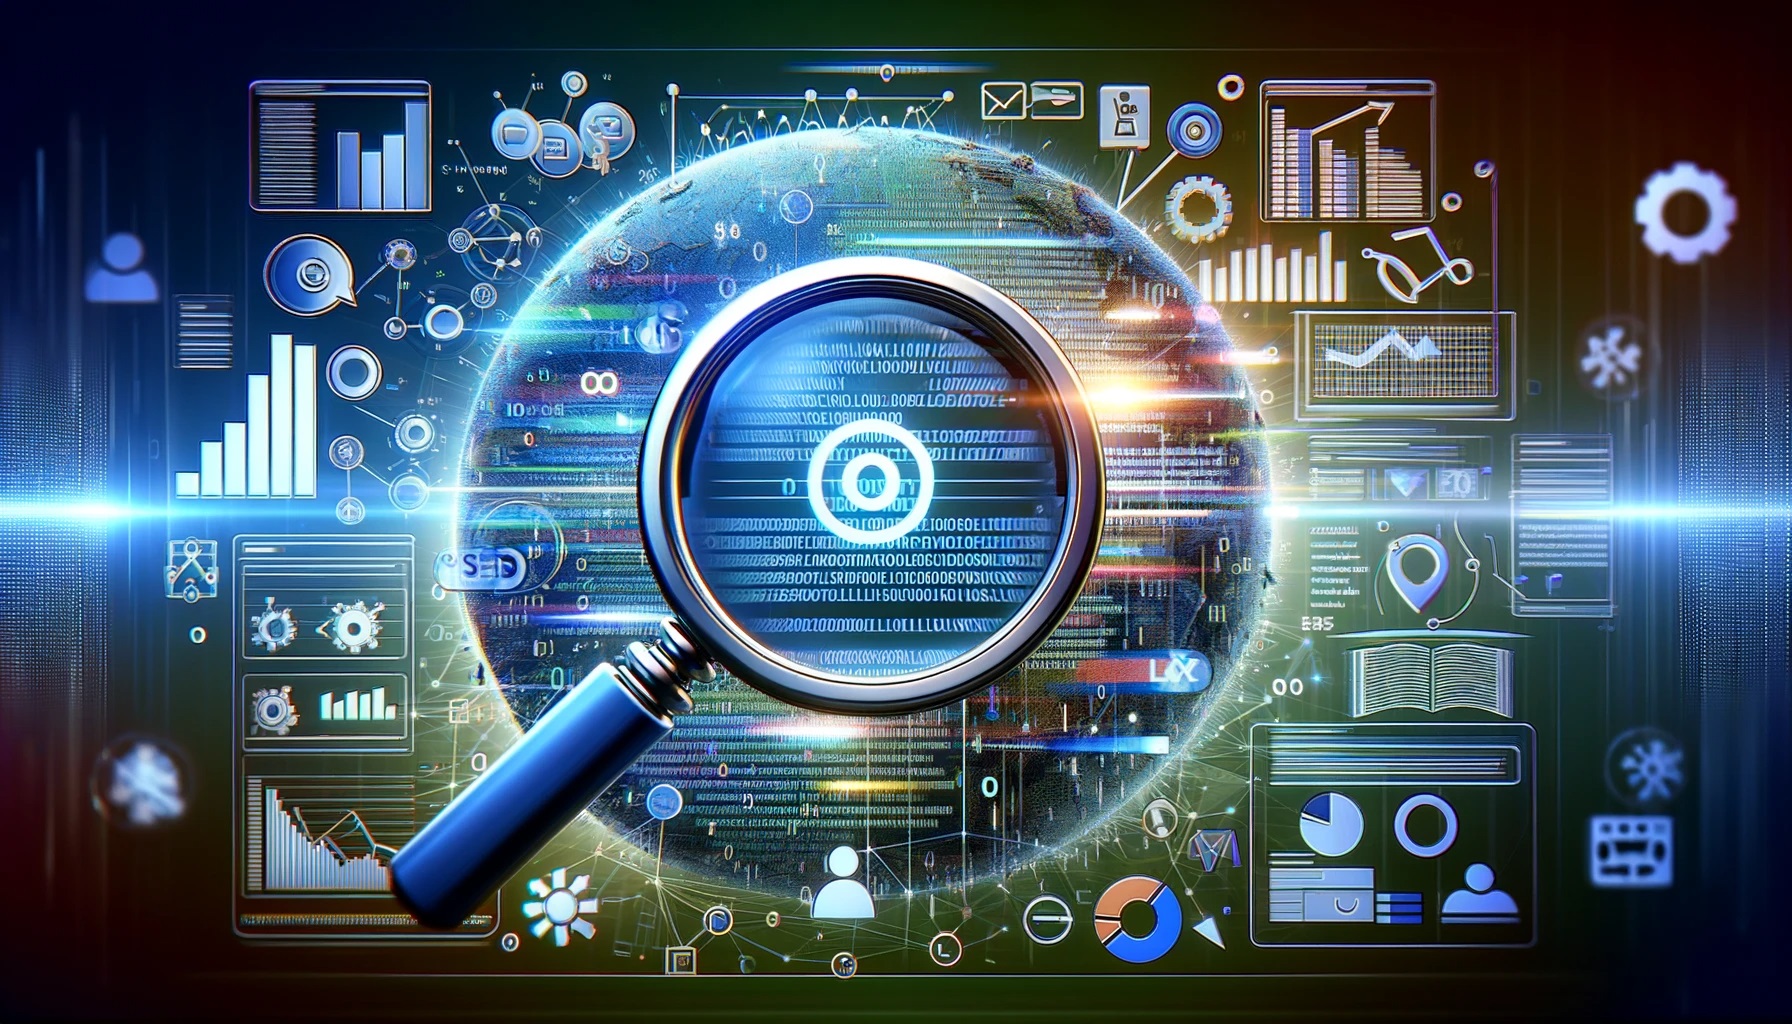 This image depicts the concept of SEO and structured data. It features a large magnifying glass focusing on a web page, highlighting structured data codes and graphs. In the background, there are subtle icons and symbols related to SEO, such as search bars, rankings, and keywords. The color palette is modern, with shades of blue and green, creating a professional and digitally-themed visual representation of SEO and structured data.